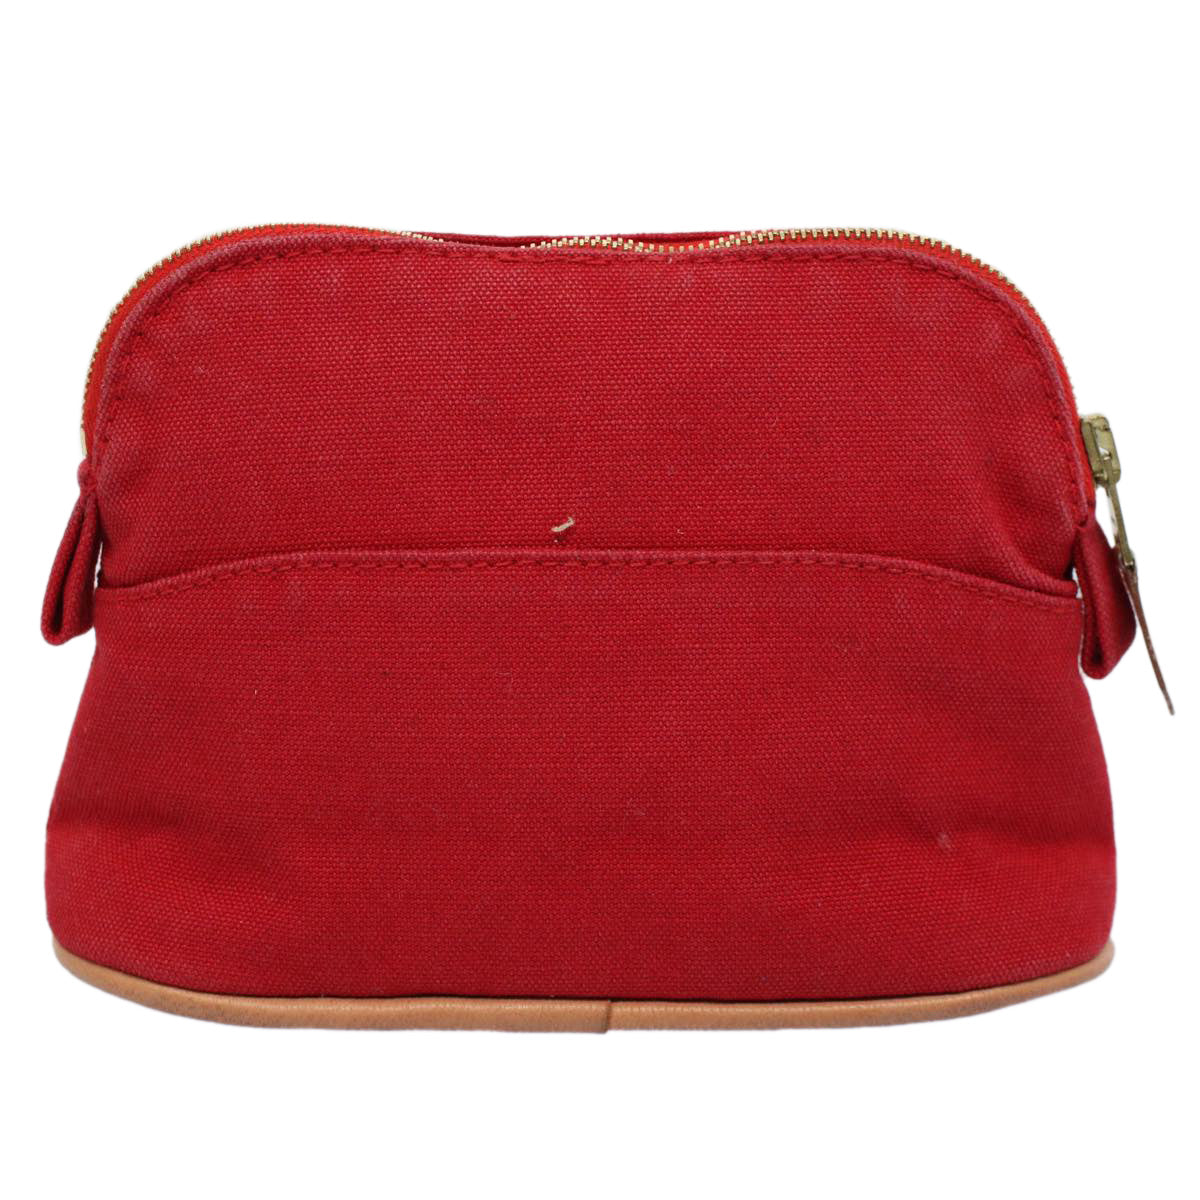 HERMES Bolide PM Pouch Canvas Red Auth bs8824 - 0